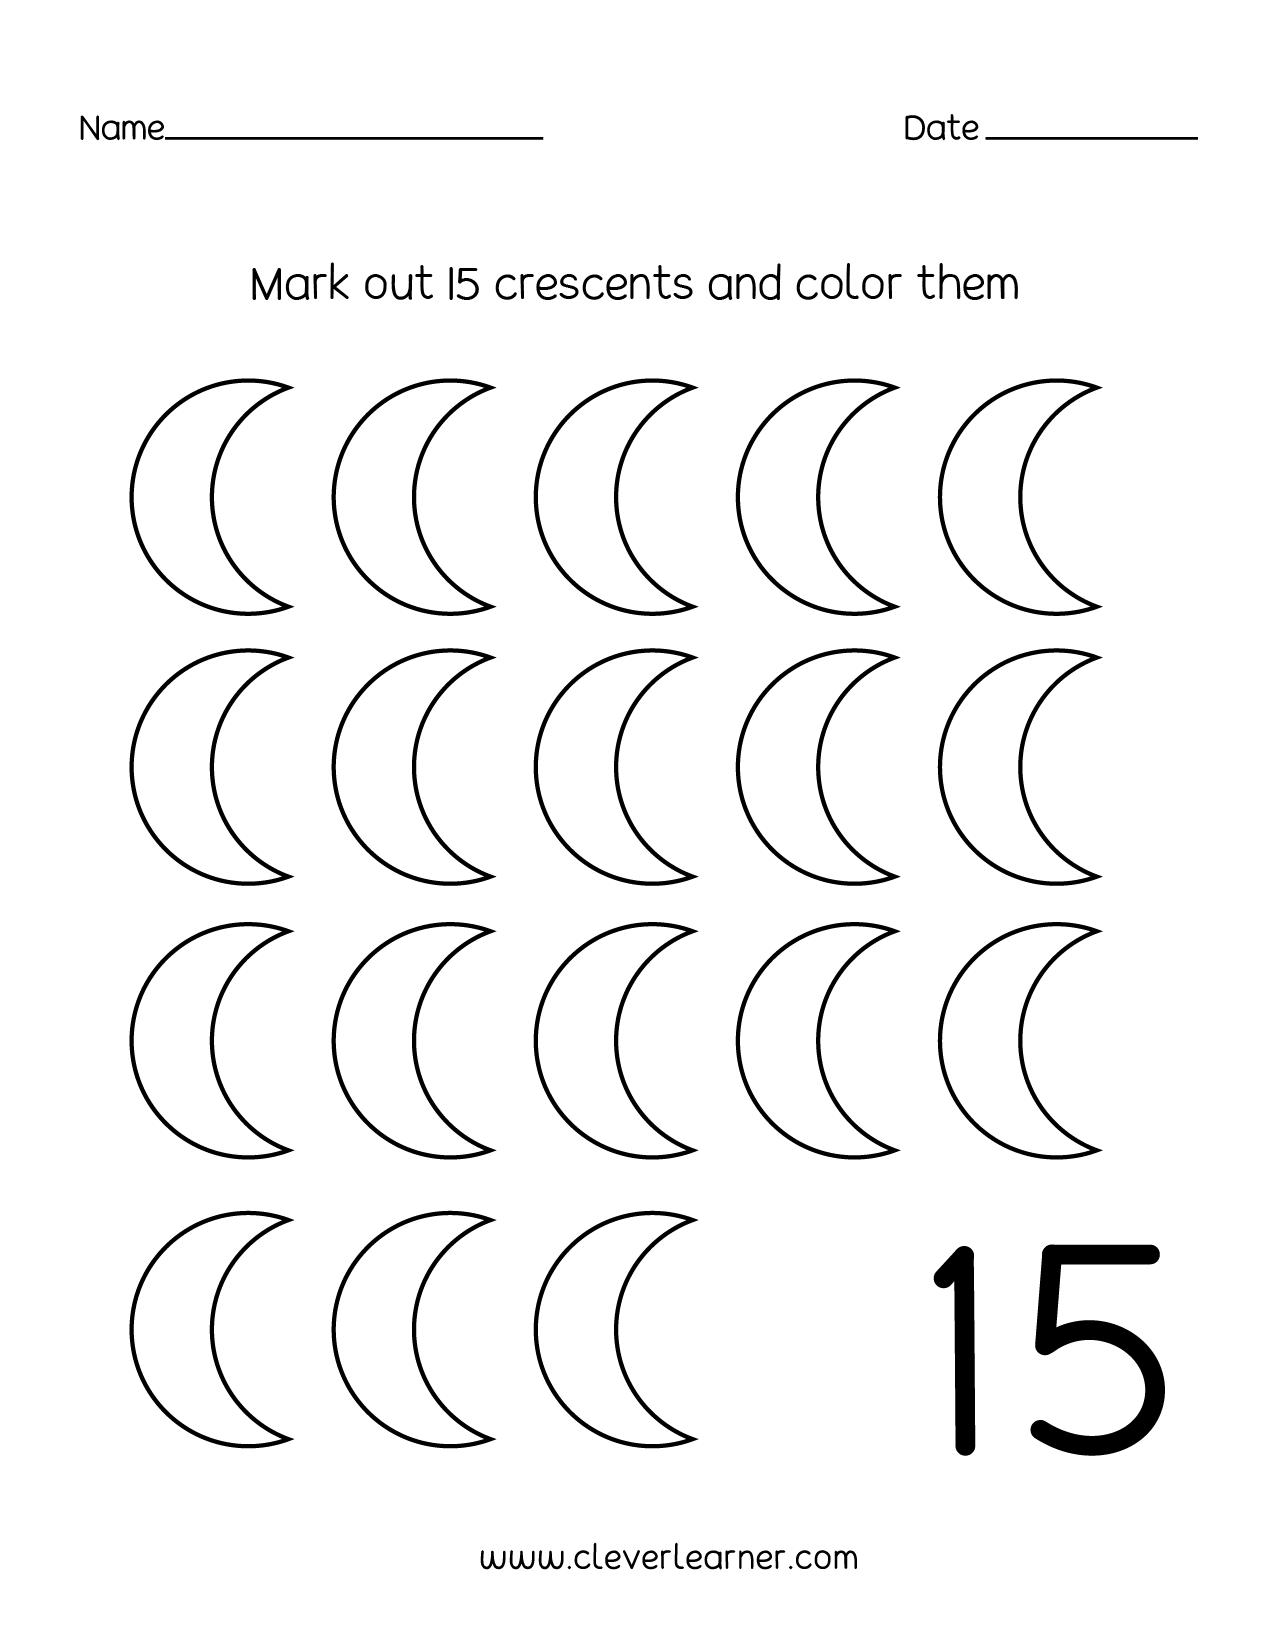 number-15-writing-counting-and-identification-printable-worksheets-for-children